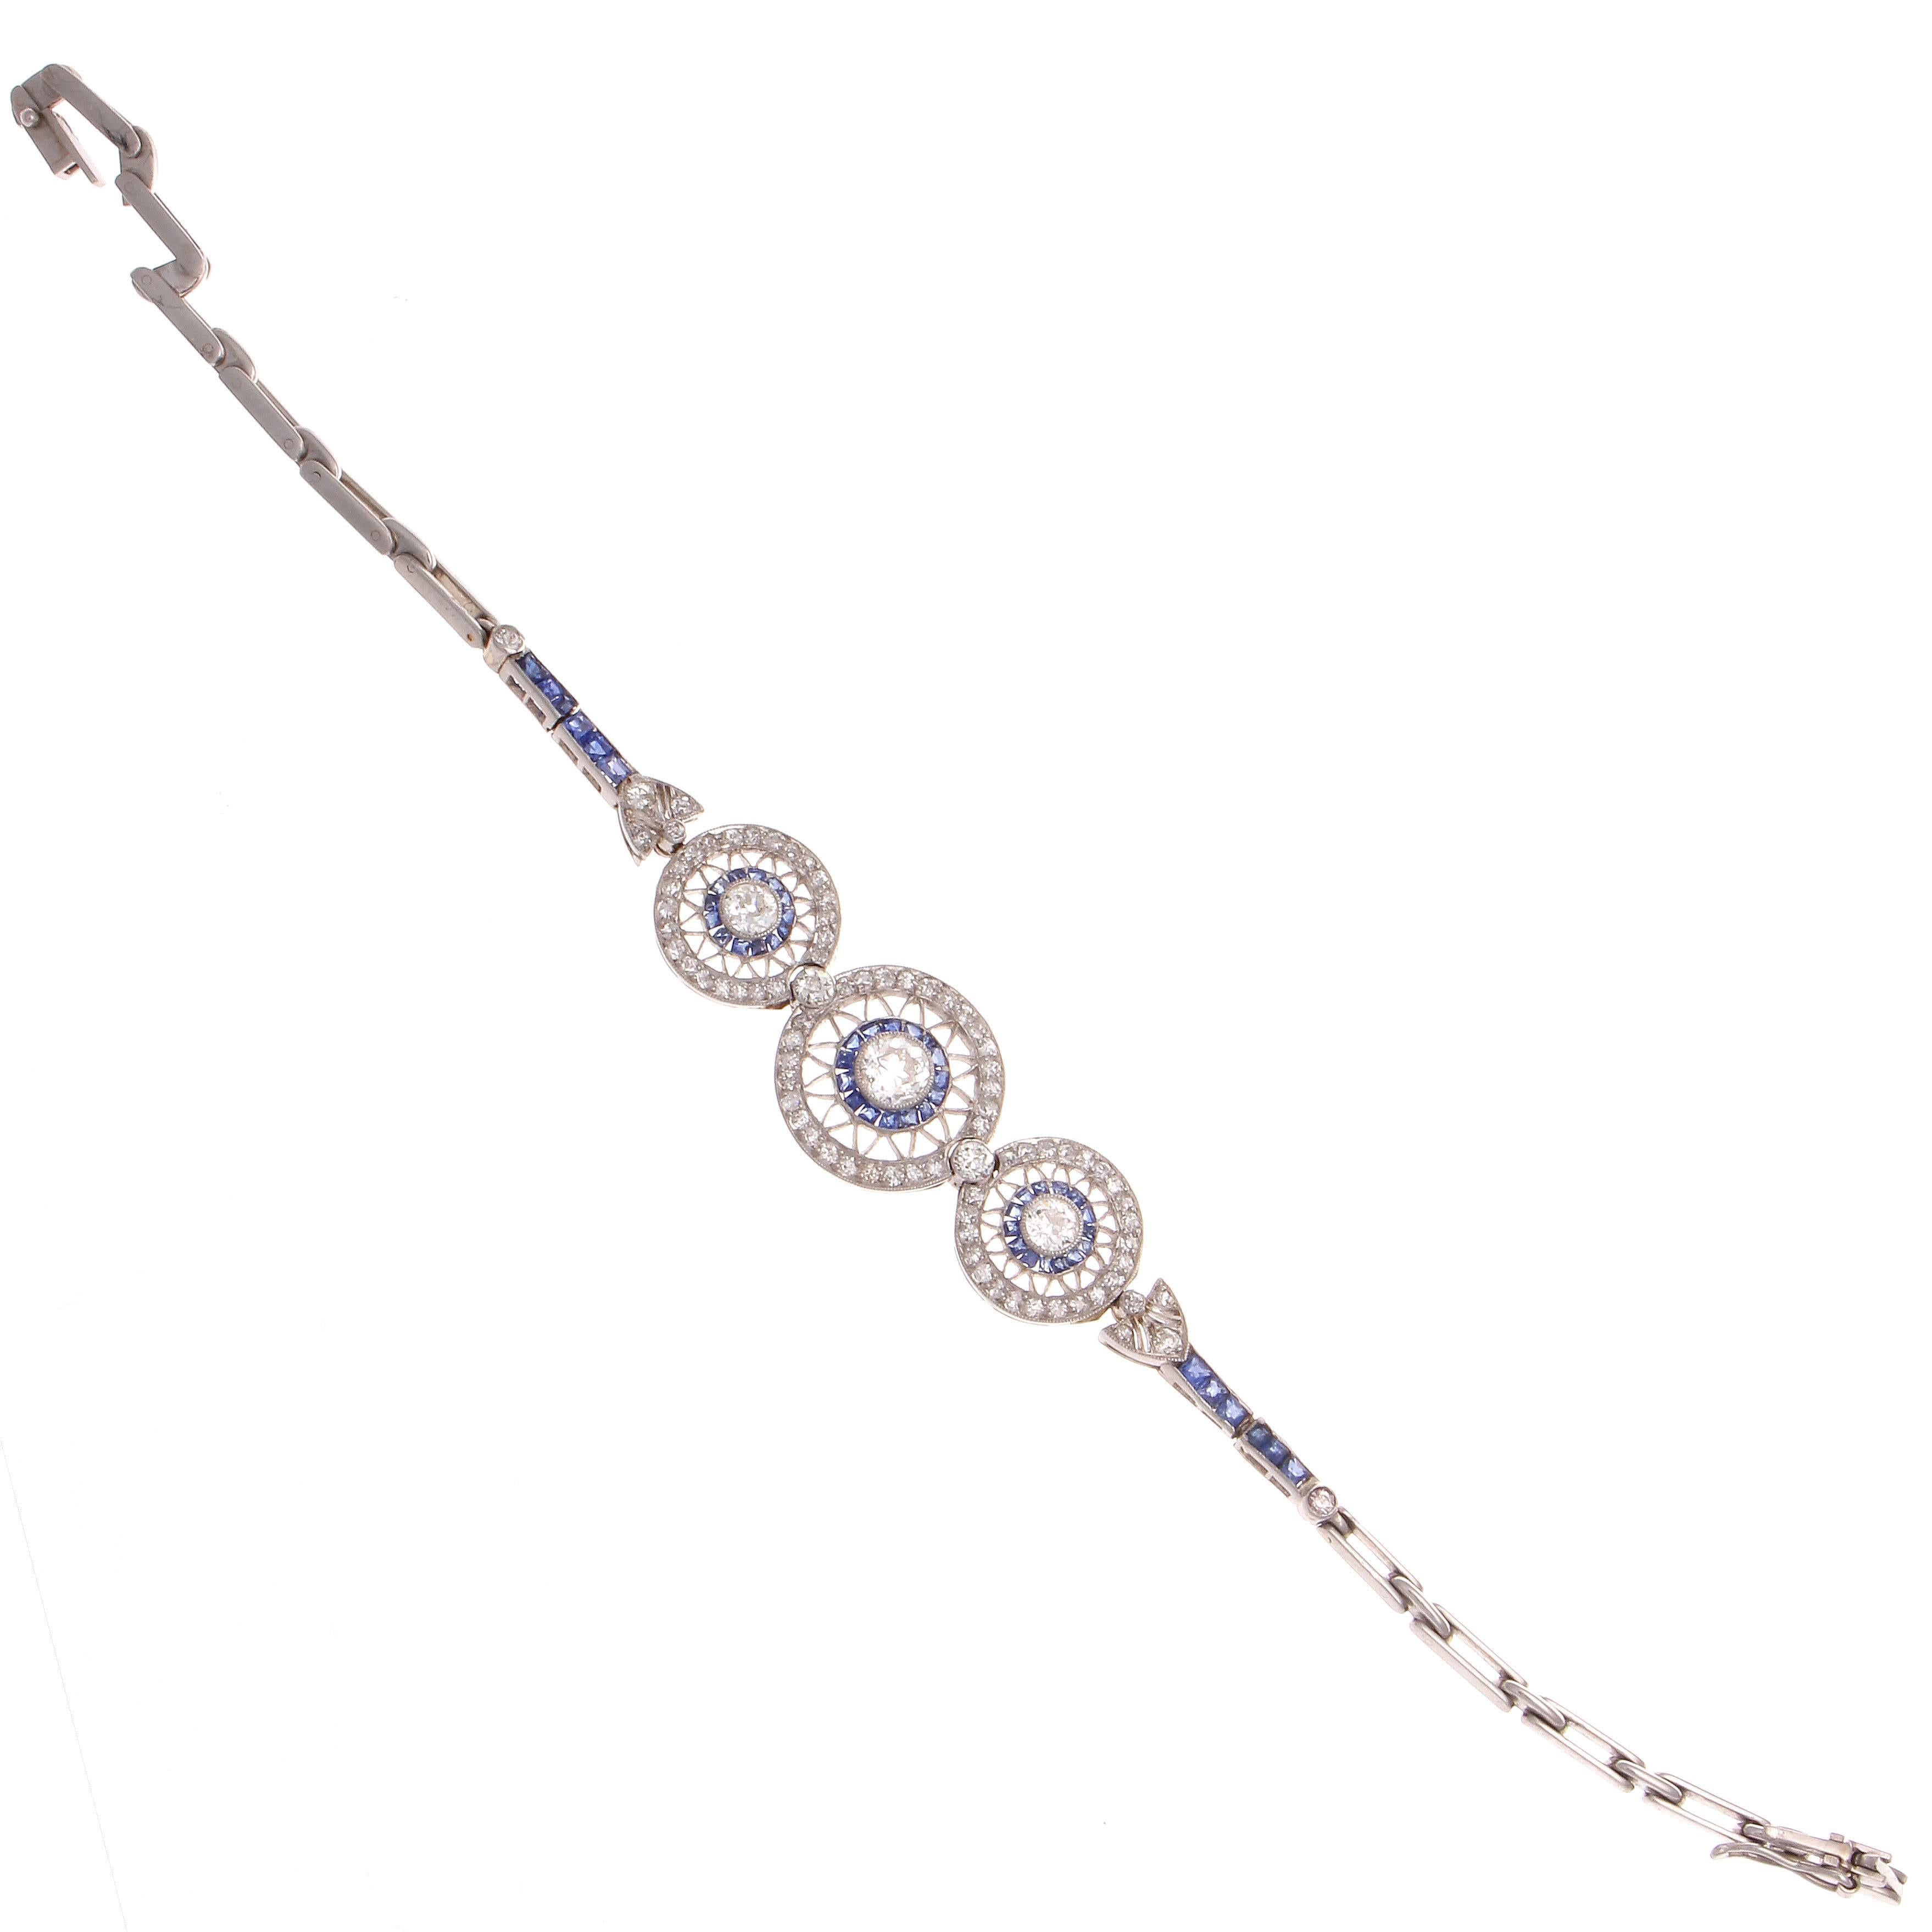 The allure of the Art Deco time period has inspired the creation of this exceptional bracelet. Featuring a 0.50 carat old European cut diamond surrounded by a halo of vivid blue sapphires and a halo of perfectly matching white diamonds separated by